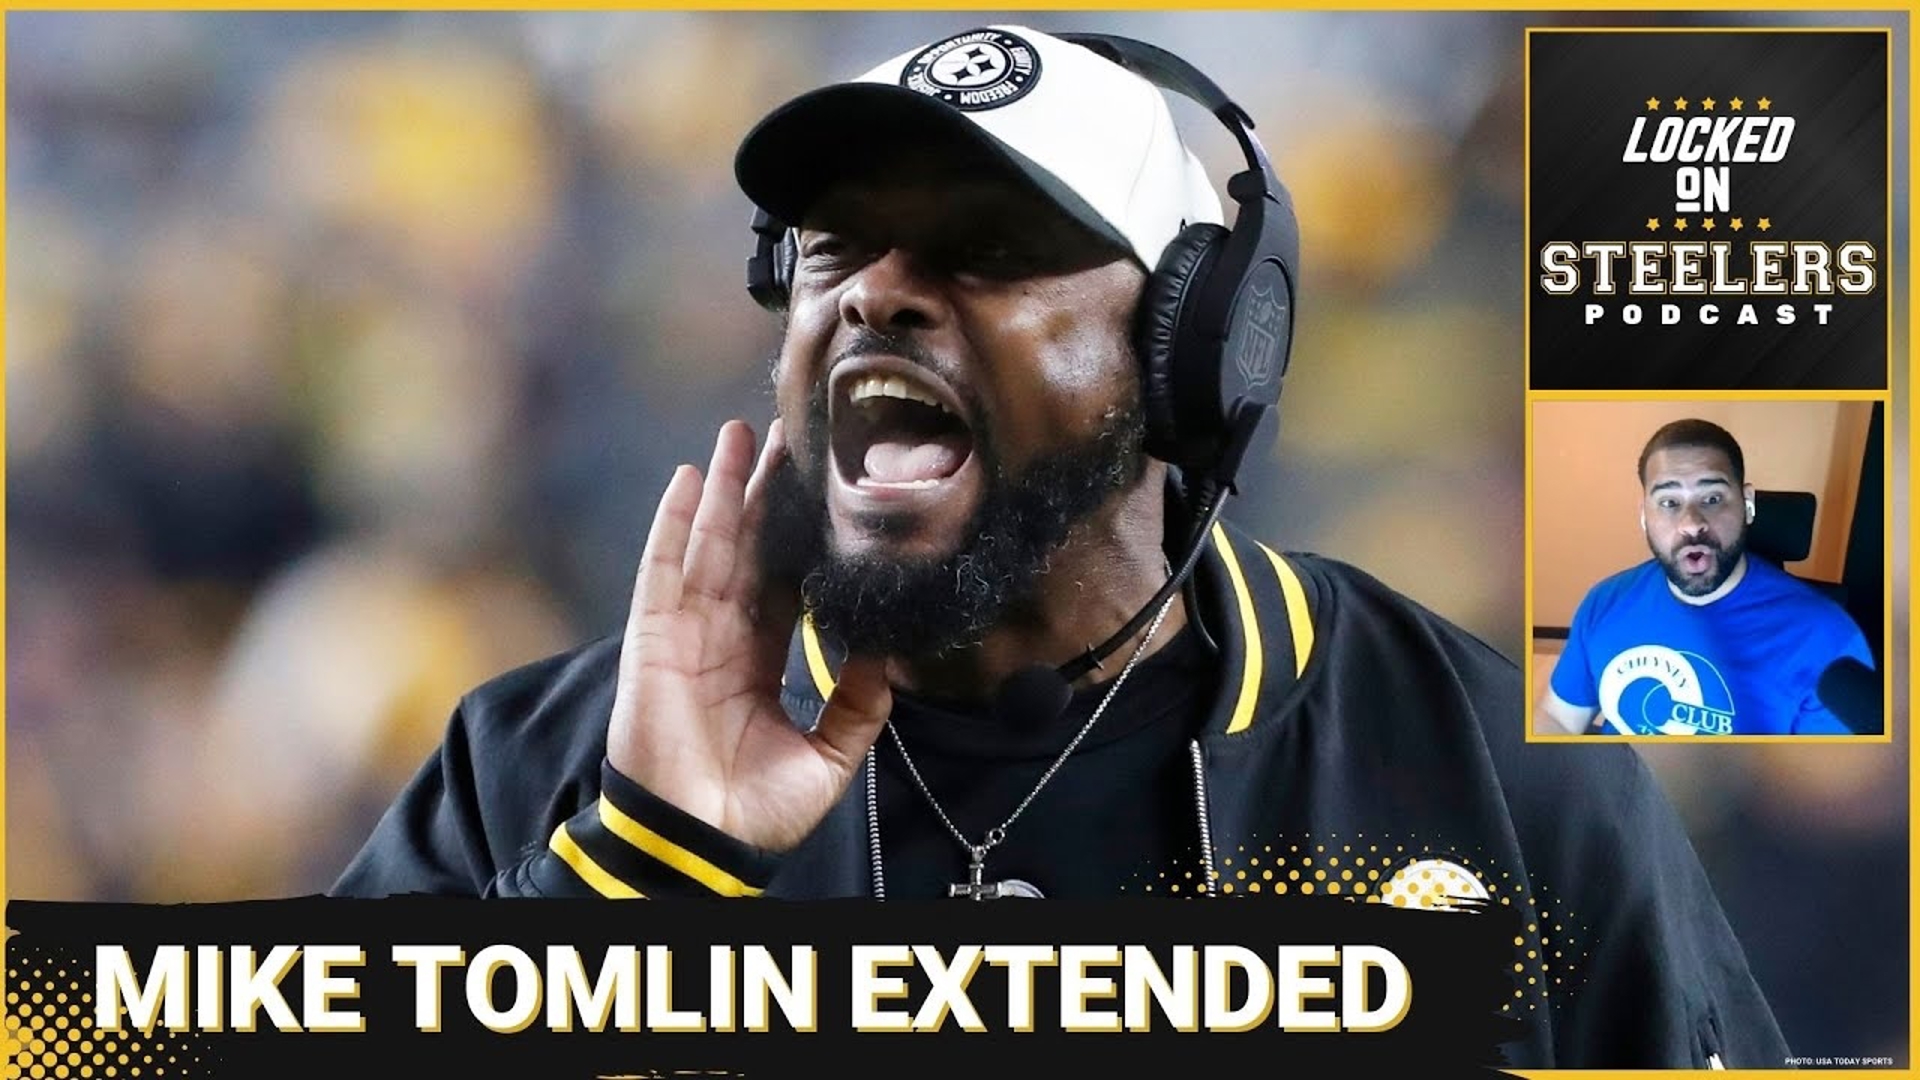 The Pittsburgh Steelers have signed Mike Tomlin to a 3-year extension to be the team's head coach through the 2027 season.